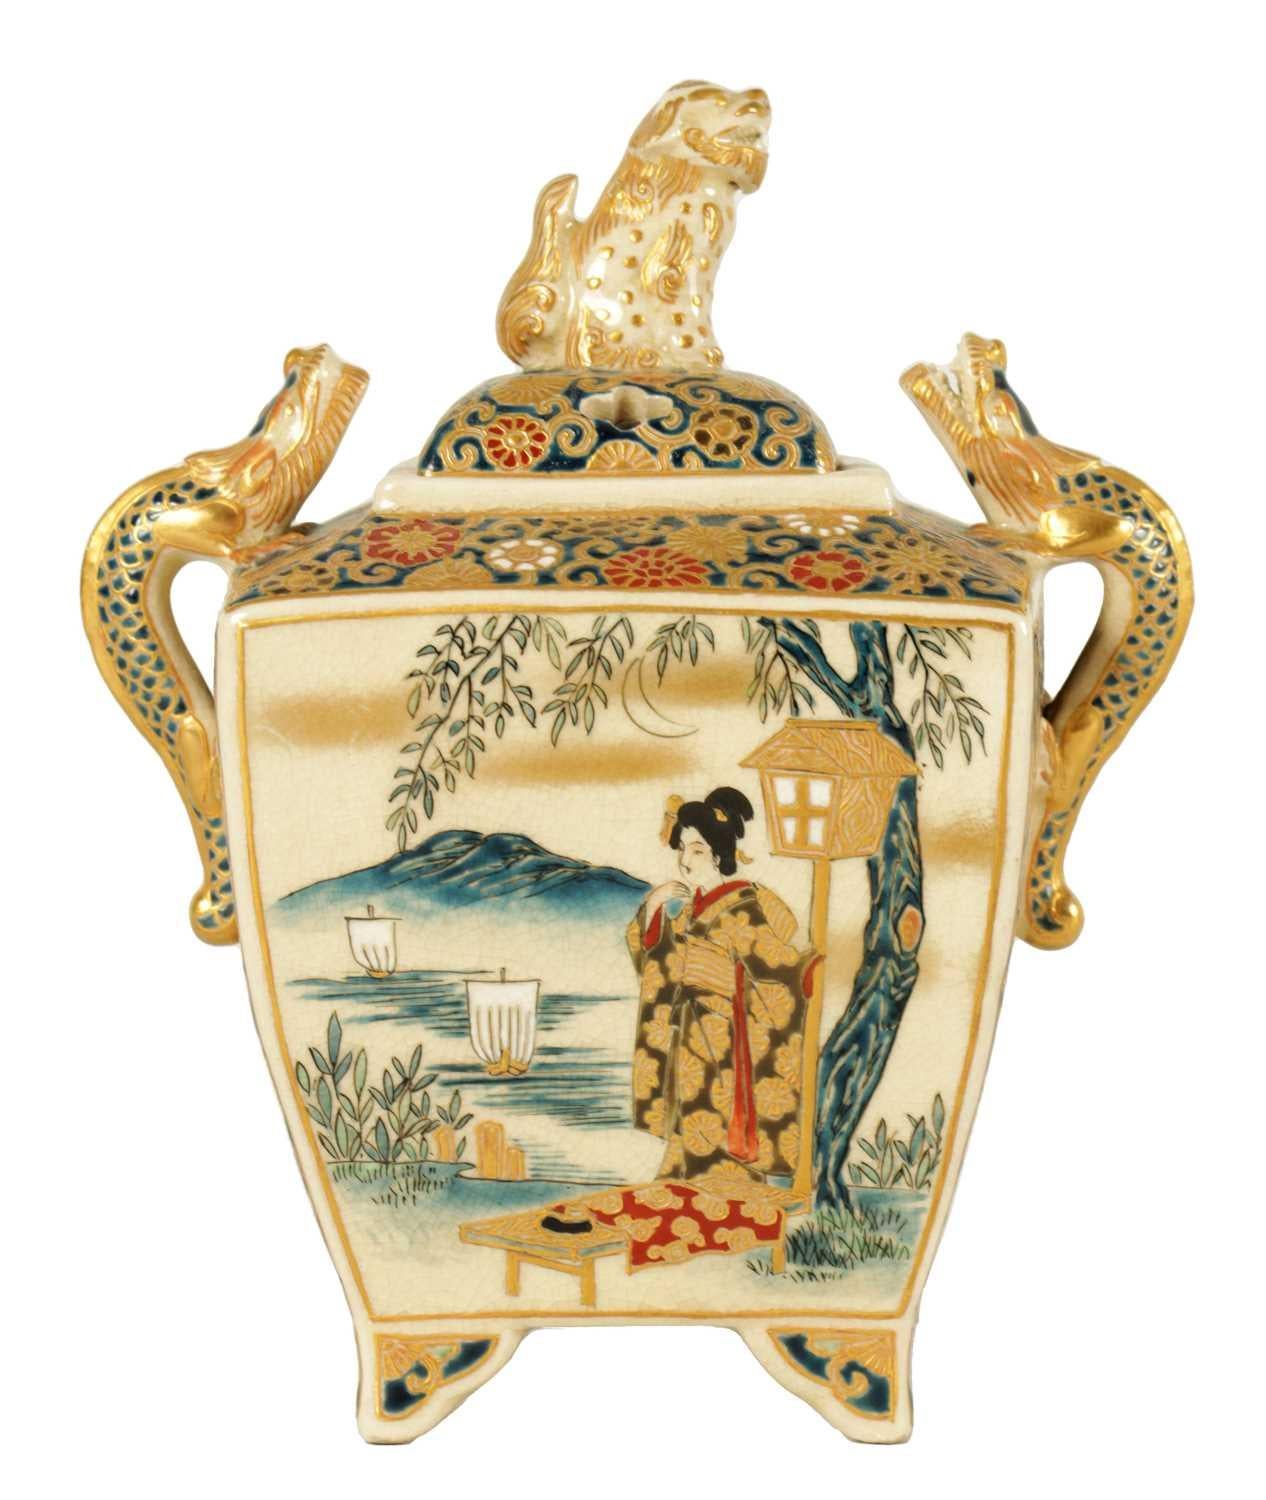 A small exquisite Japanese Meiji Period satsuma Koro of square tapering form, fitted with dragon handles and a foo dog finial, finely gilded and decorated with female figures in landscape settings with tree, mountain, lake with boats and